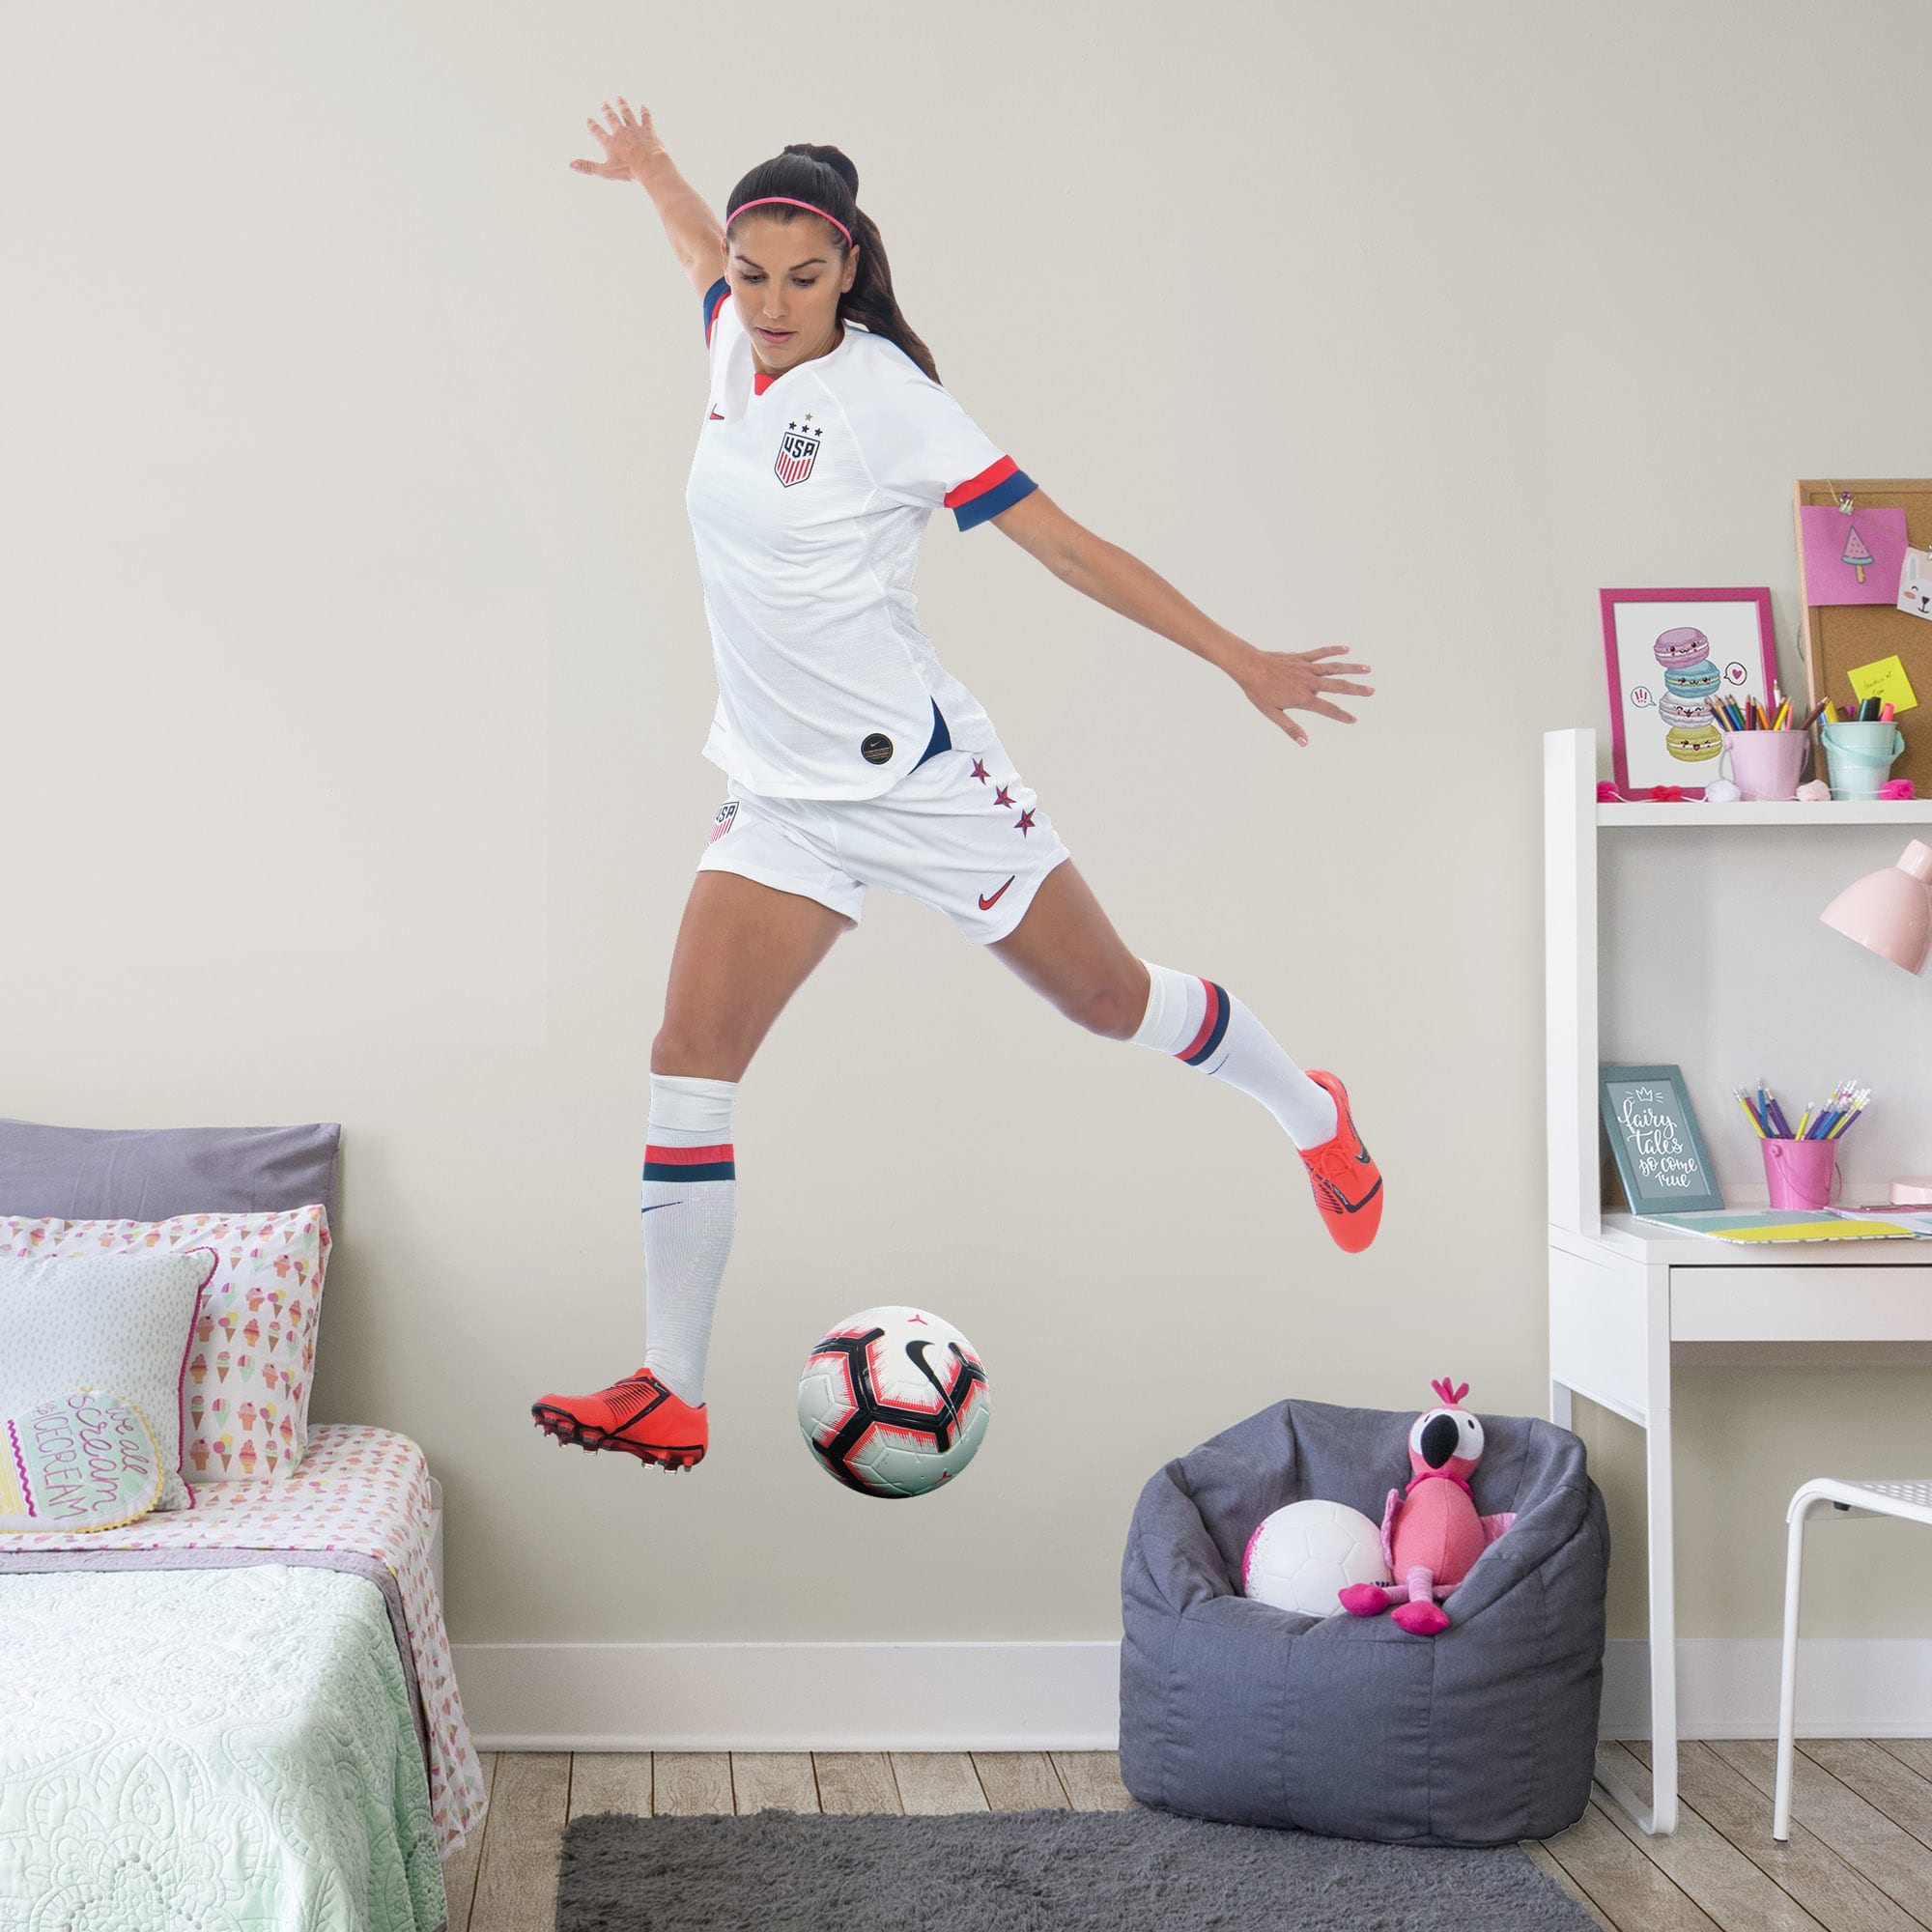 Alex Morgan: Striker - Officially Licensed Removable Wall Decal Life-Size Athlete + 2 Decals (47"W x 77"H) by Fathead | Vinyl